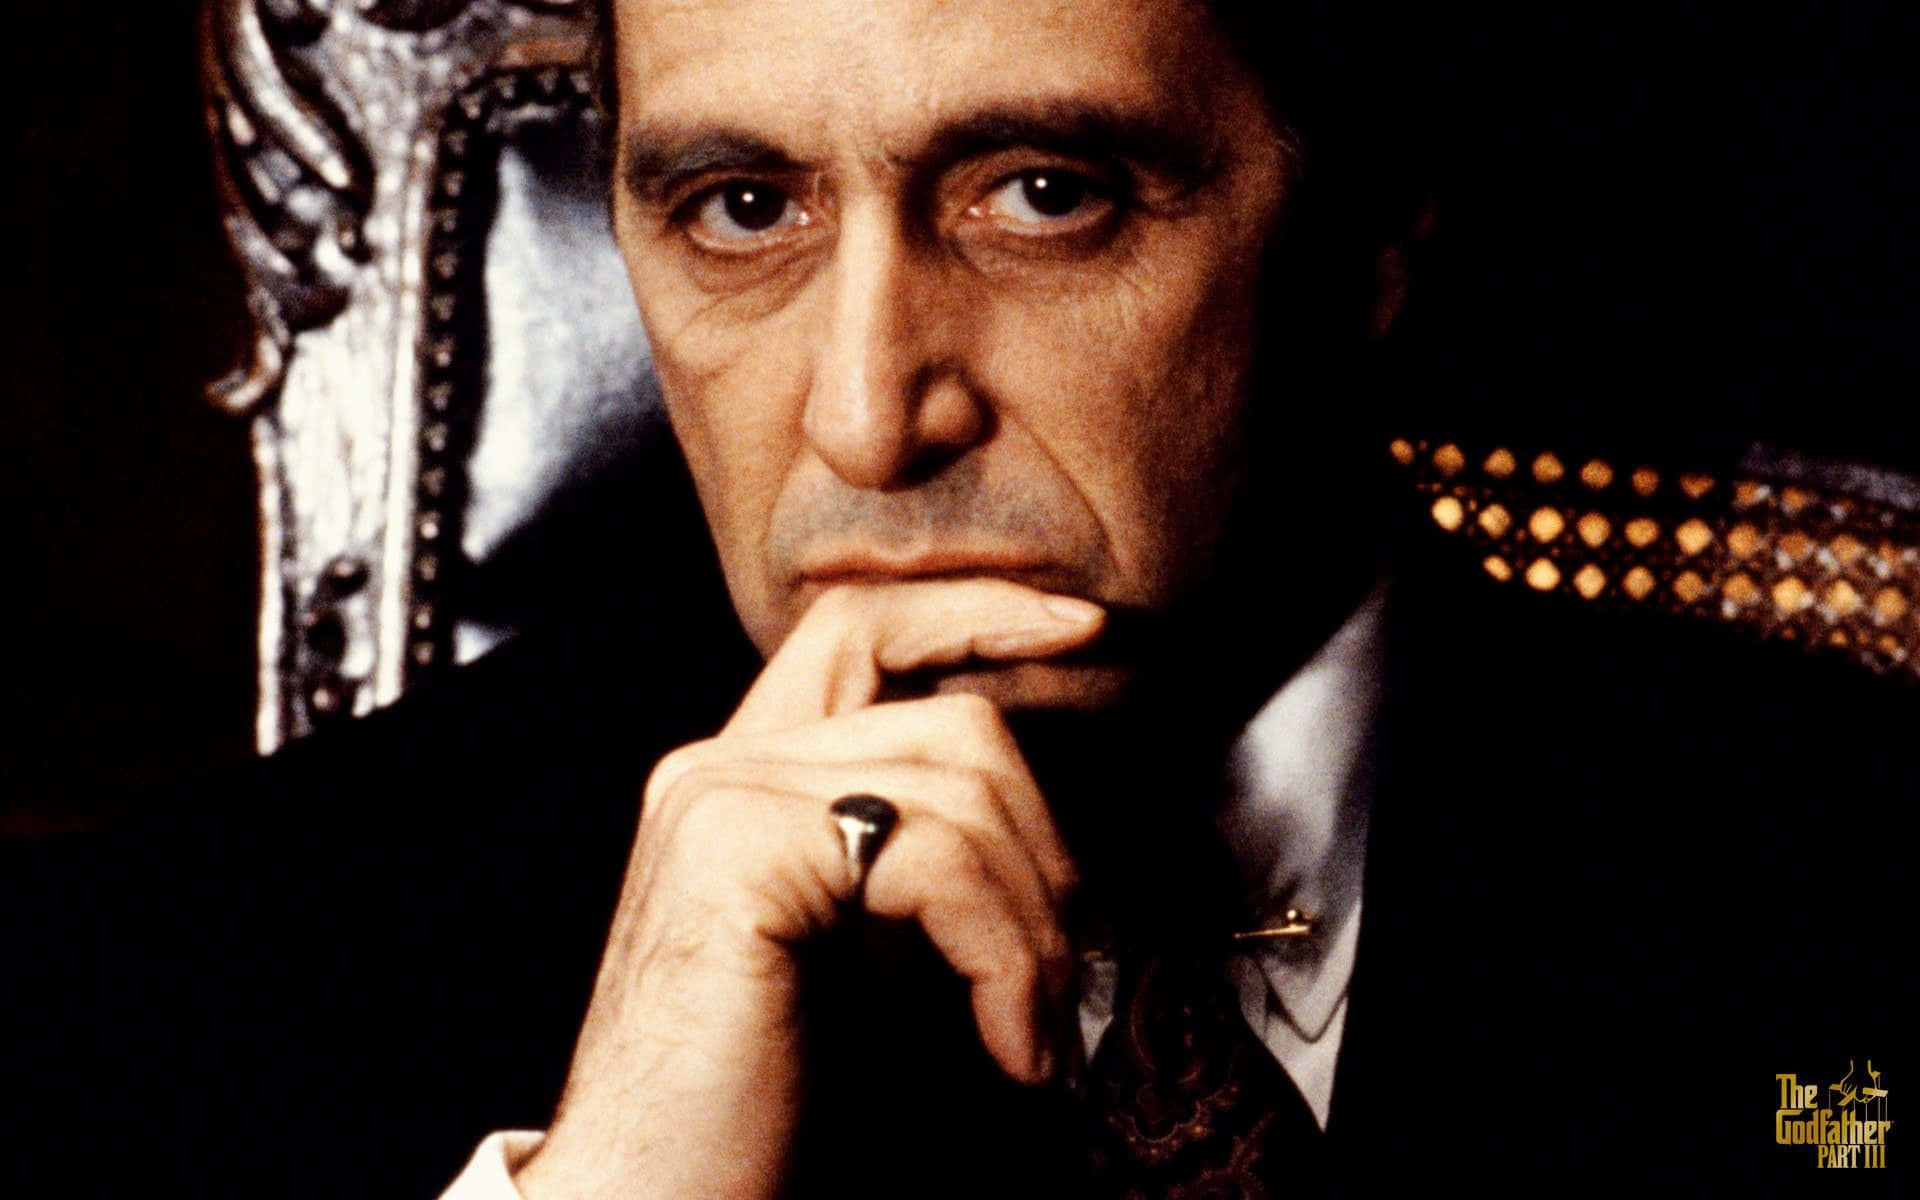 "Michael Corleone, played by Al Pacino, in Francis Ford Coppola's classic movie, The Godfather." Wallpaper